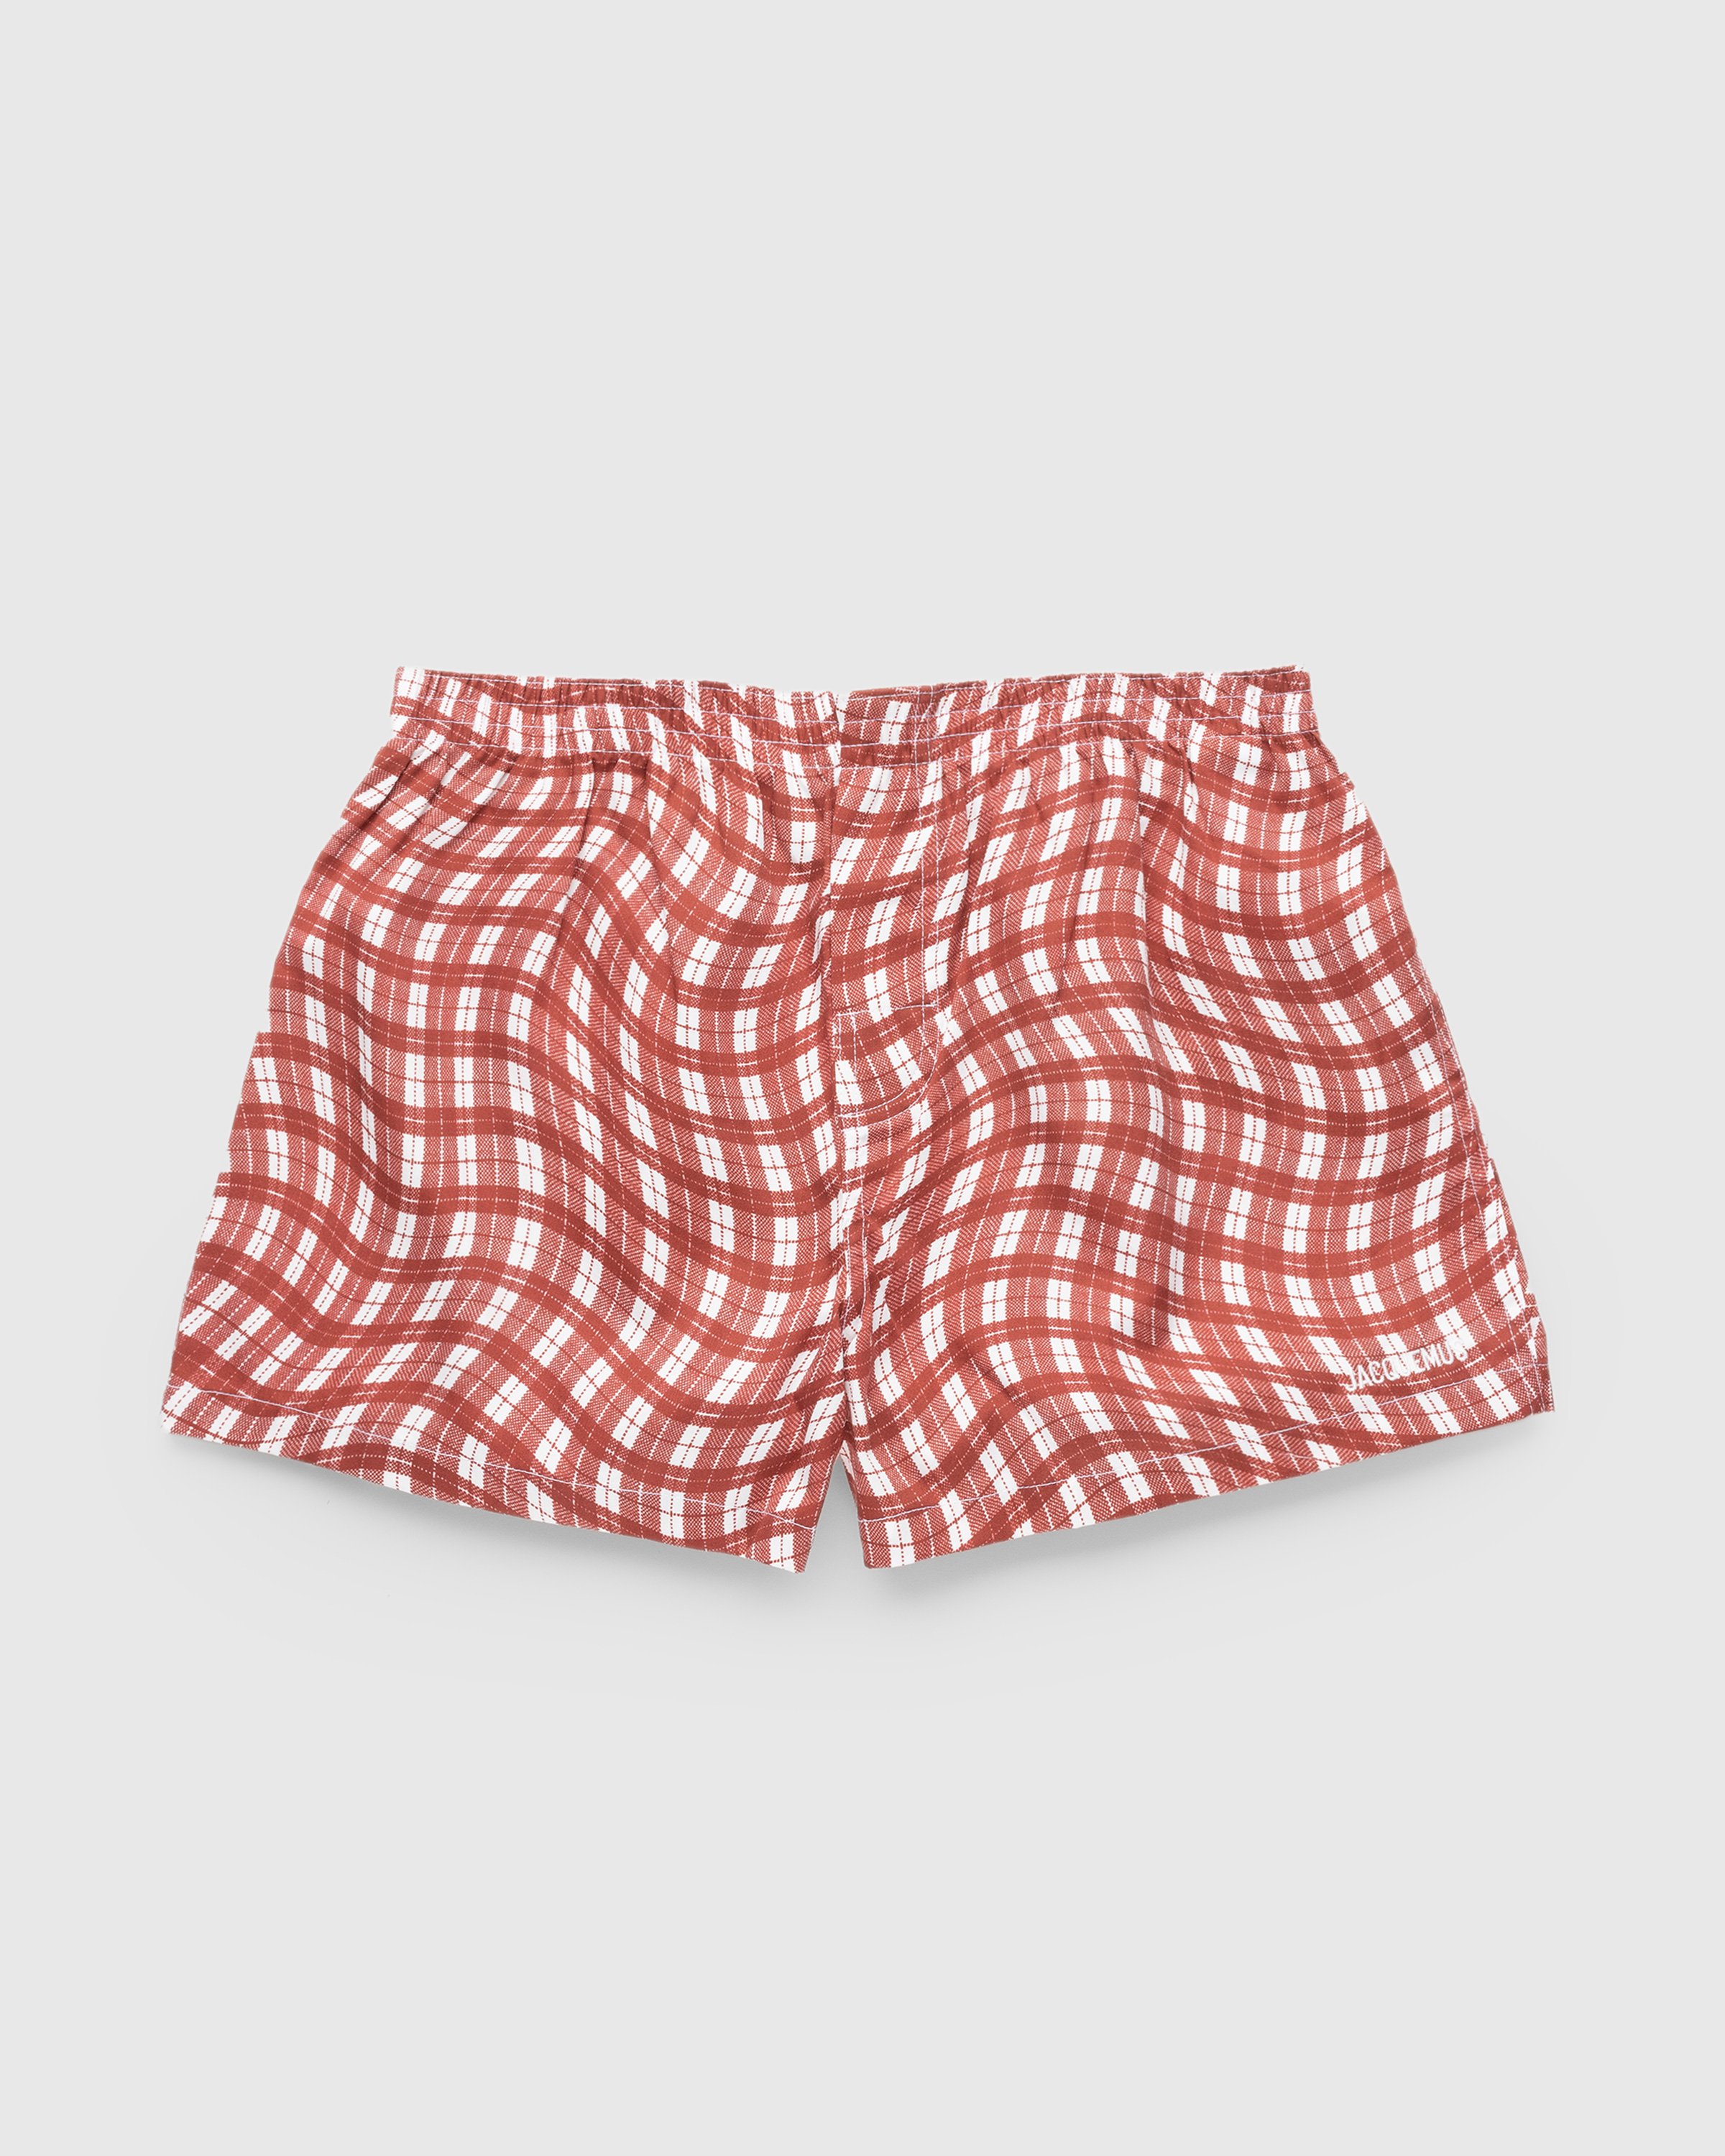 JACQUEMUS - Le Caleçon Print Dark Red Deformed Check - Clothing - Red - Image 1